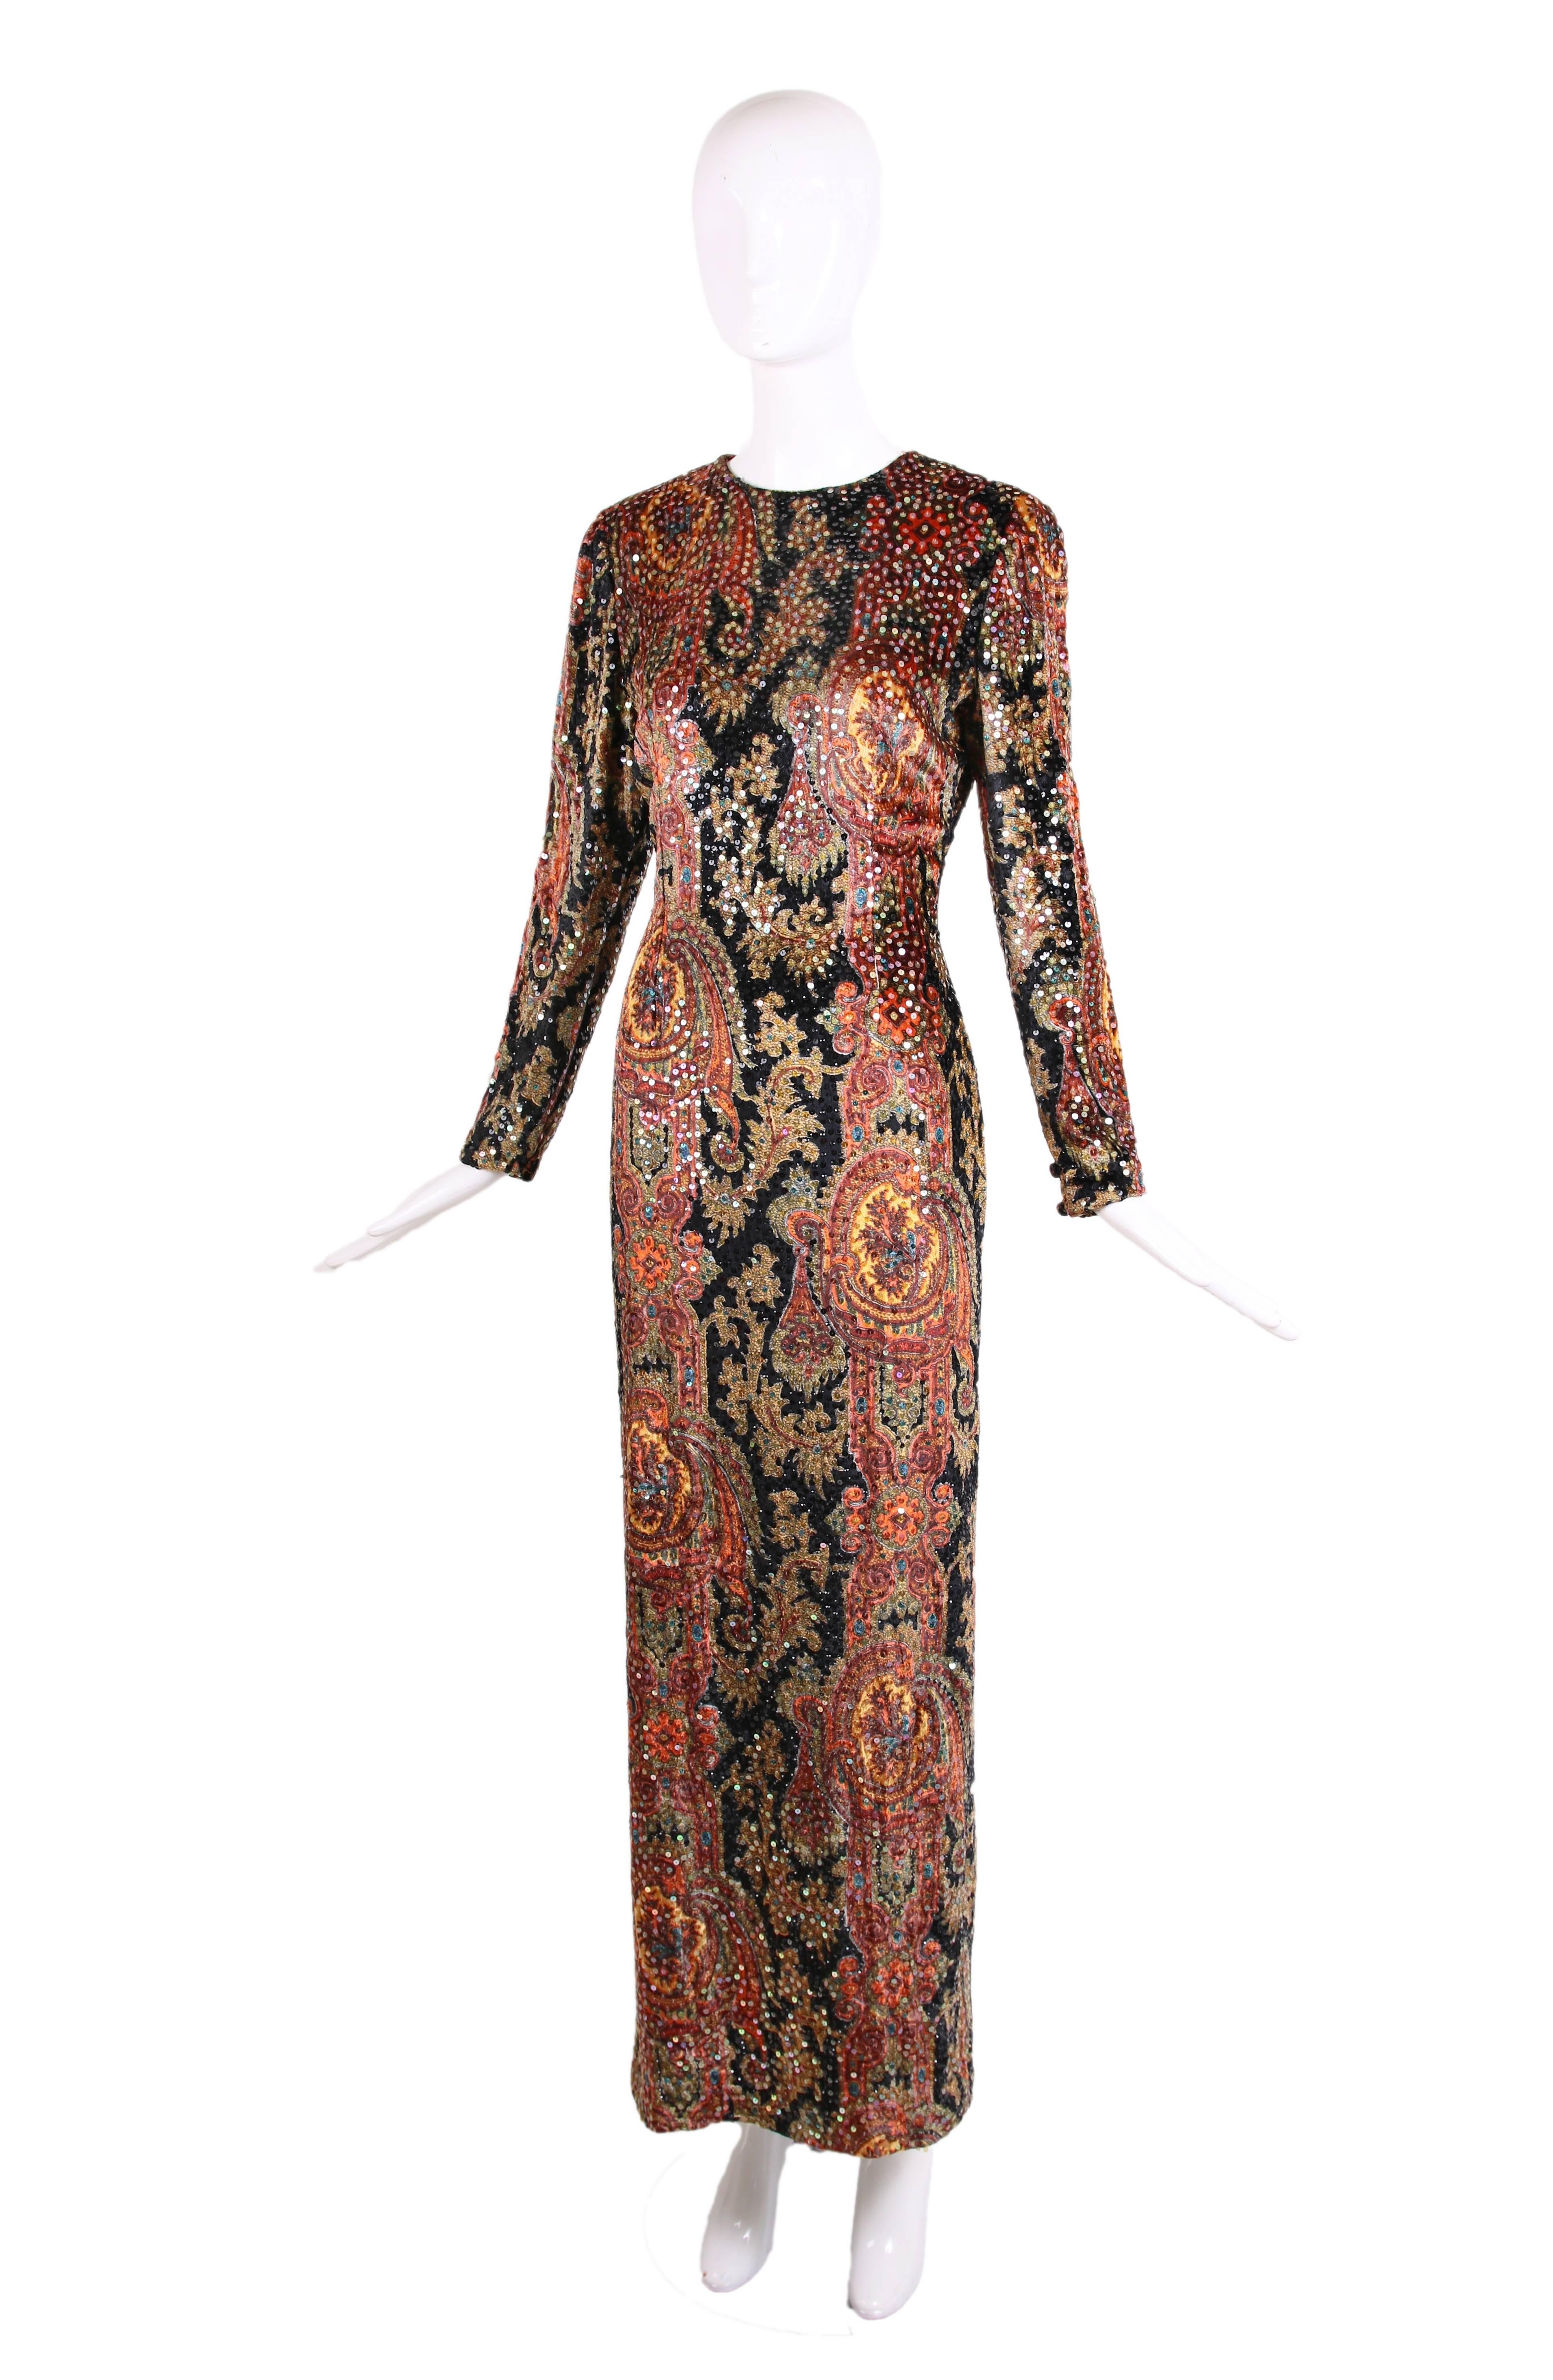 Bill Blass silk velvet long sleeved evening gown with sequins and paisley print. In excellent condition - no size tag so please consult measurements. Most likely this gown will fit a size 4 or a small 6 but again, consult measurements.